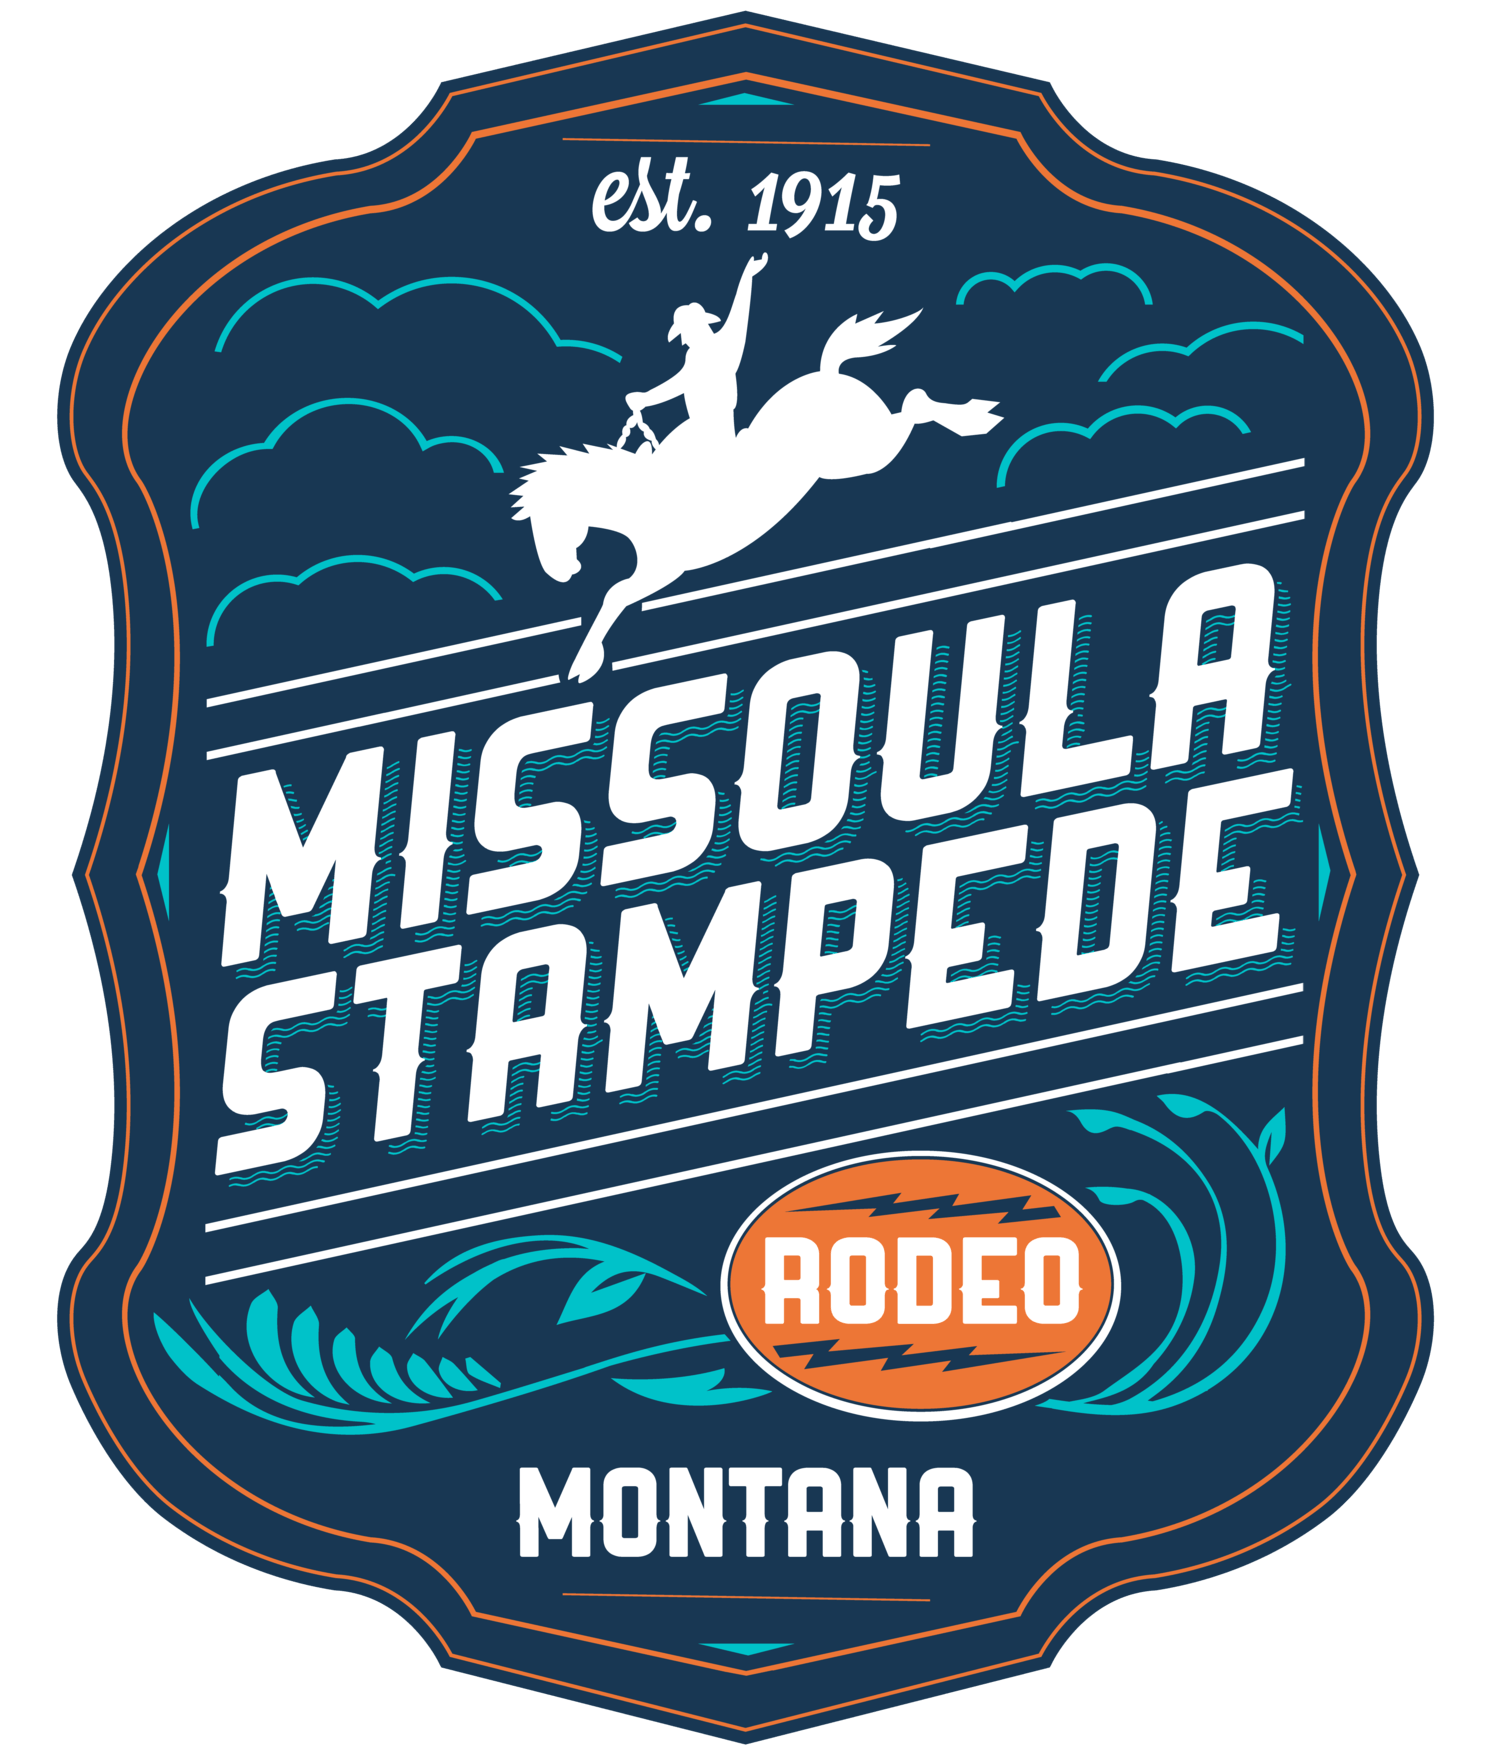 Rodeo Logo - Check out the new Missoula Stampede Rodeo Logo! — Missoula Fairgrounds